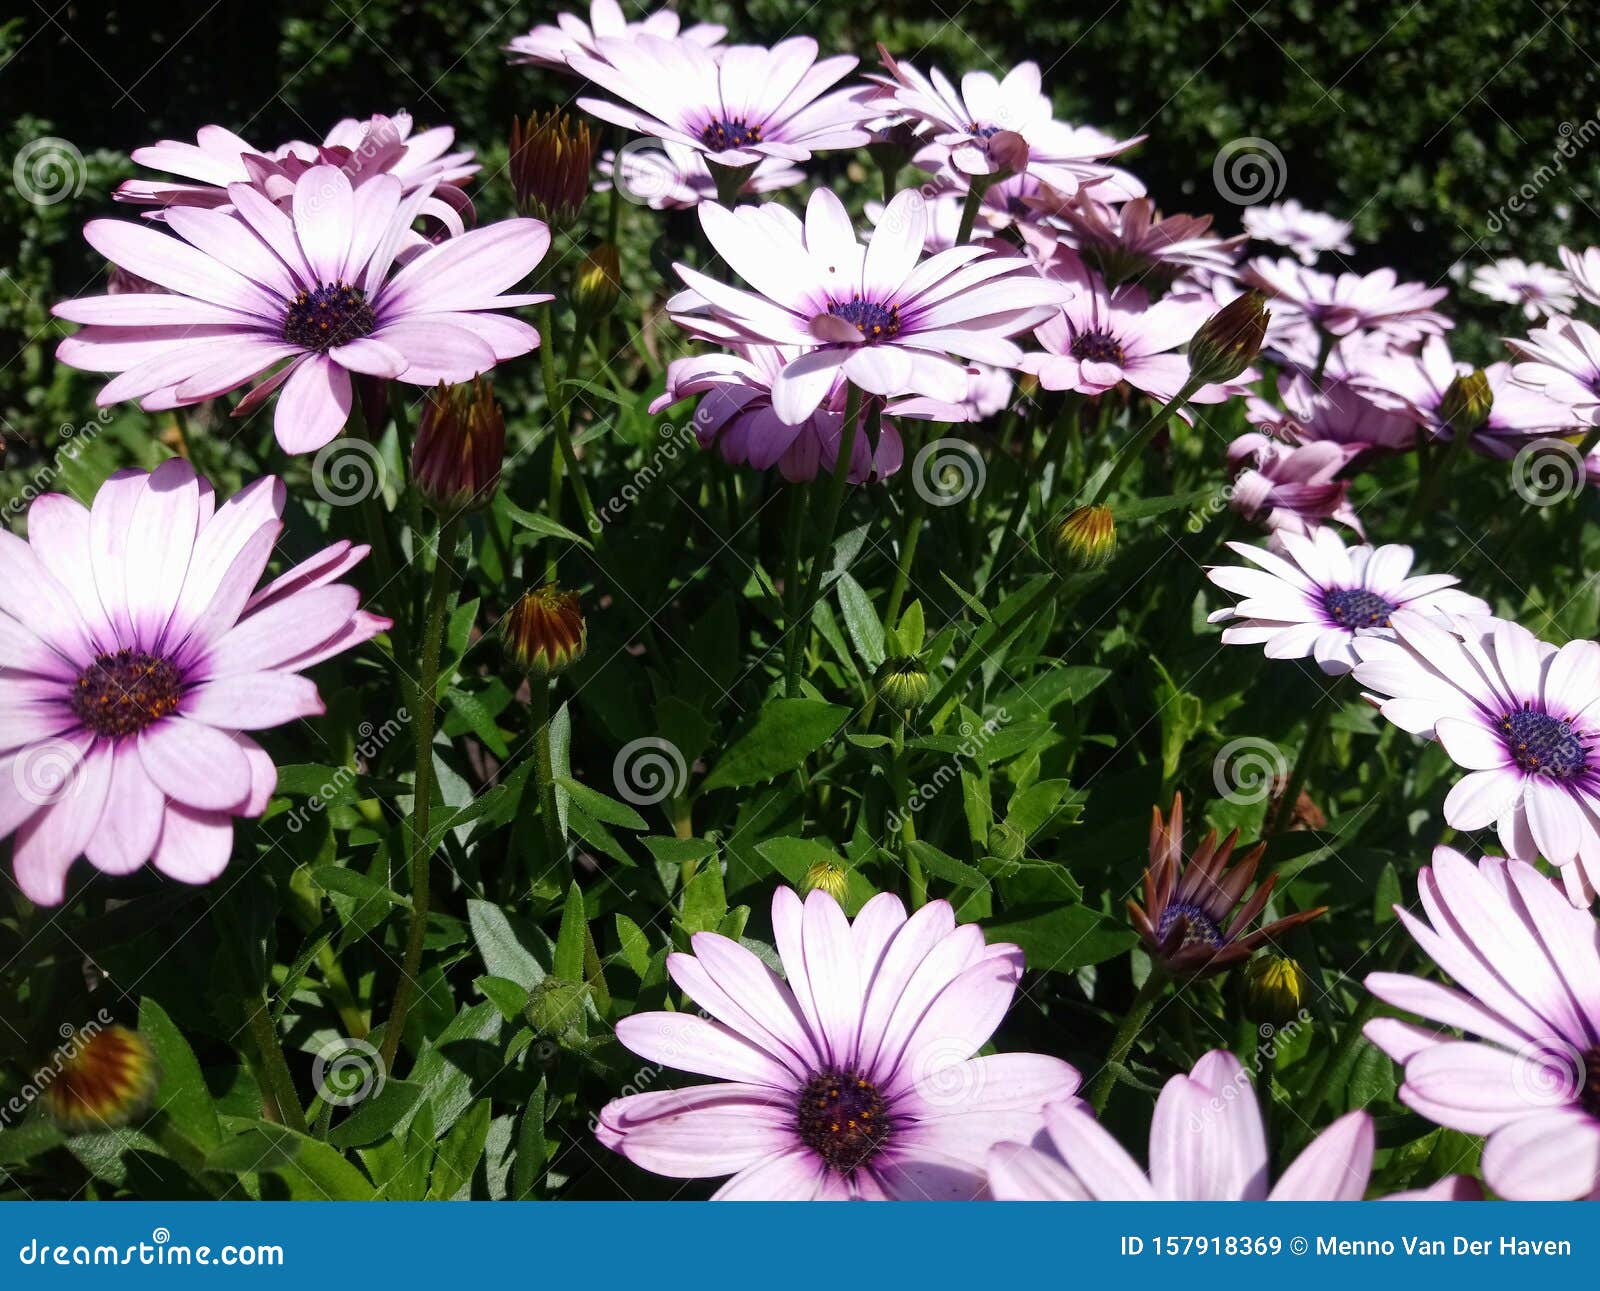 Beautiful Cape Marguerite Or Sundays River Daisy In A Garden Stock Image Image Of Outdoors Flower 157918369